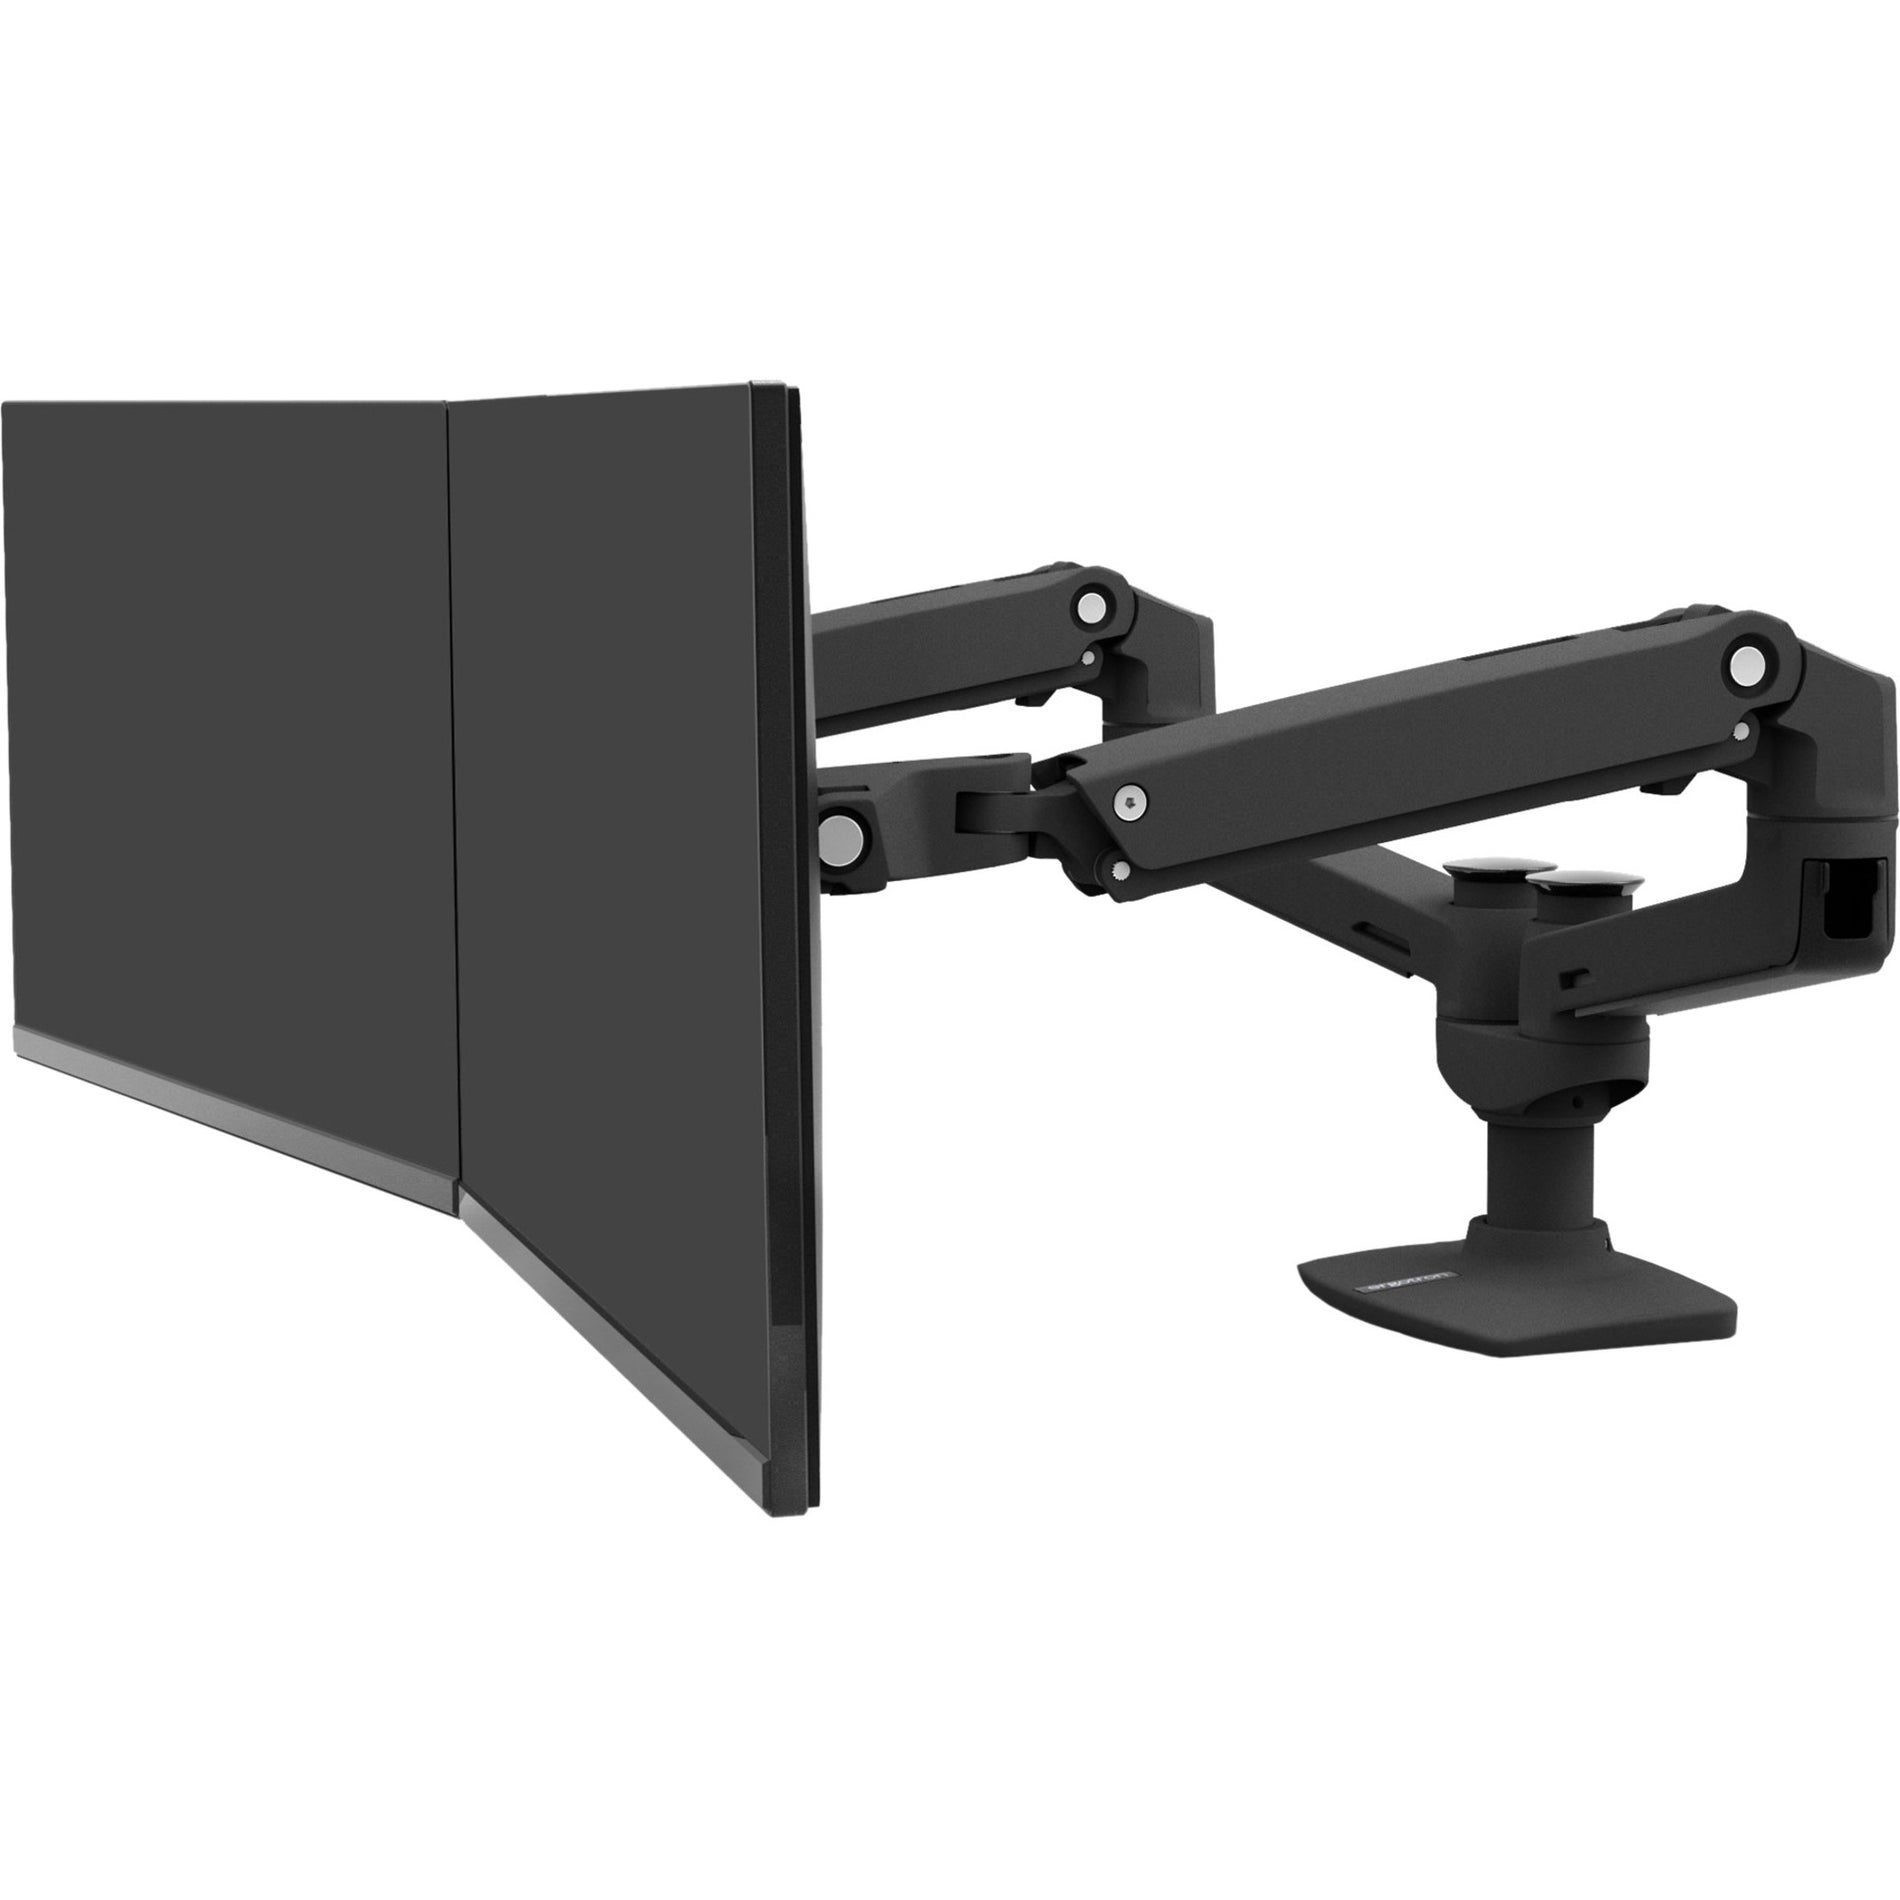 Ergotron 45-245-224 LX Dual Side-by-Side Arm Matte Black, Mounting Arm for Monitor